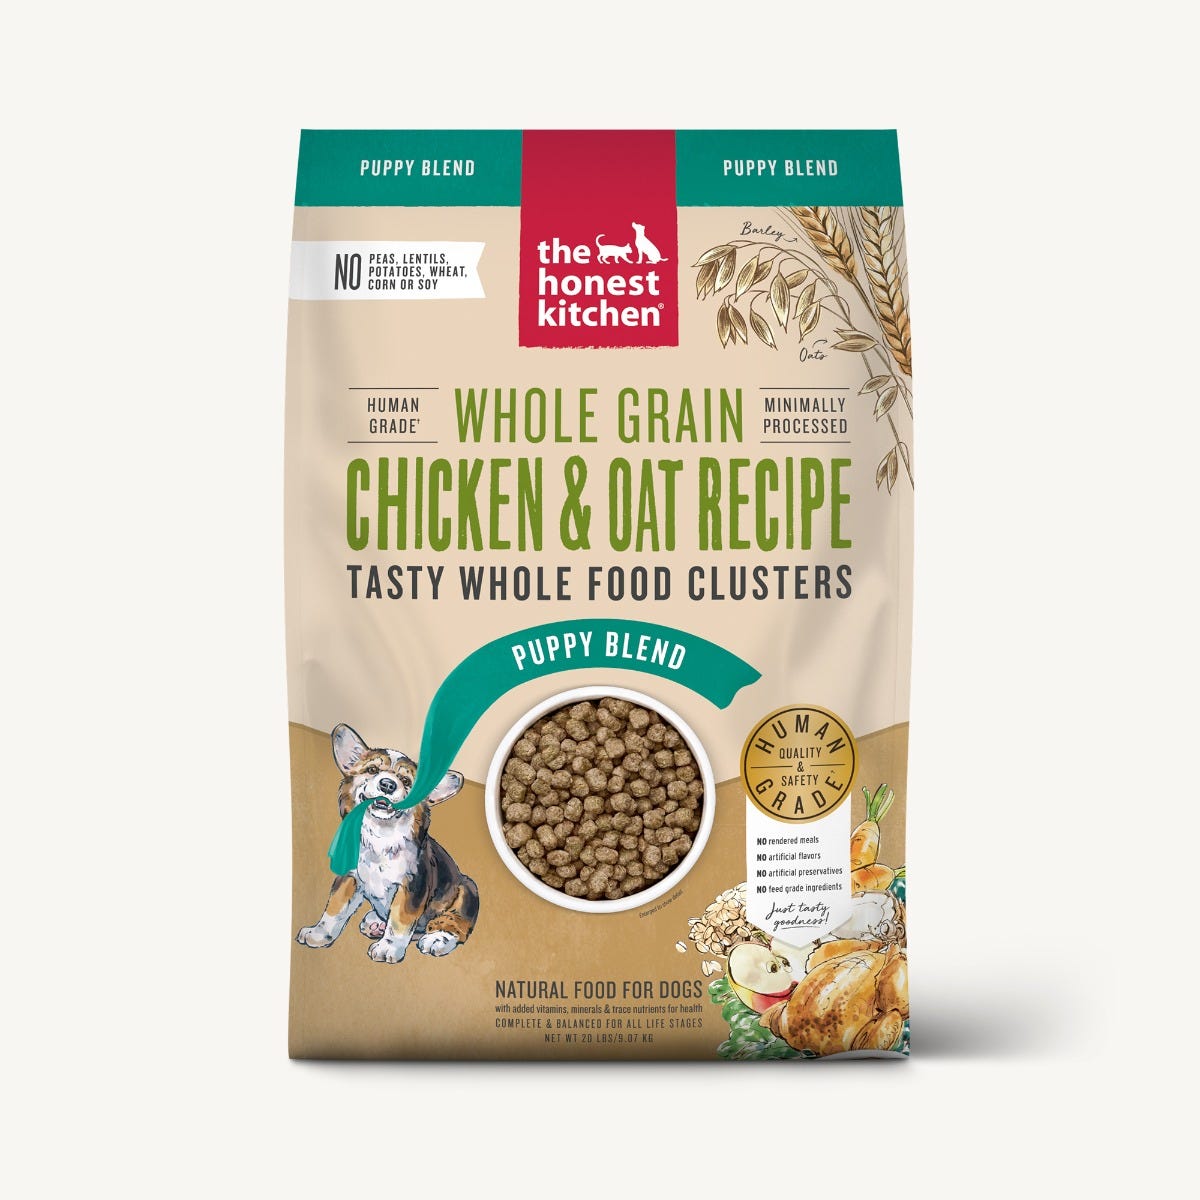 The Honest Kitchen - Whole Food Clusters for Puppies - Whole Grain Chicken Recipe (Dry Dog Food)